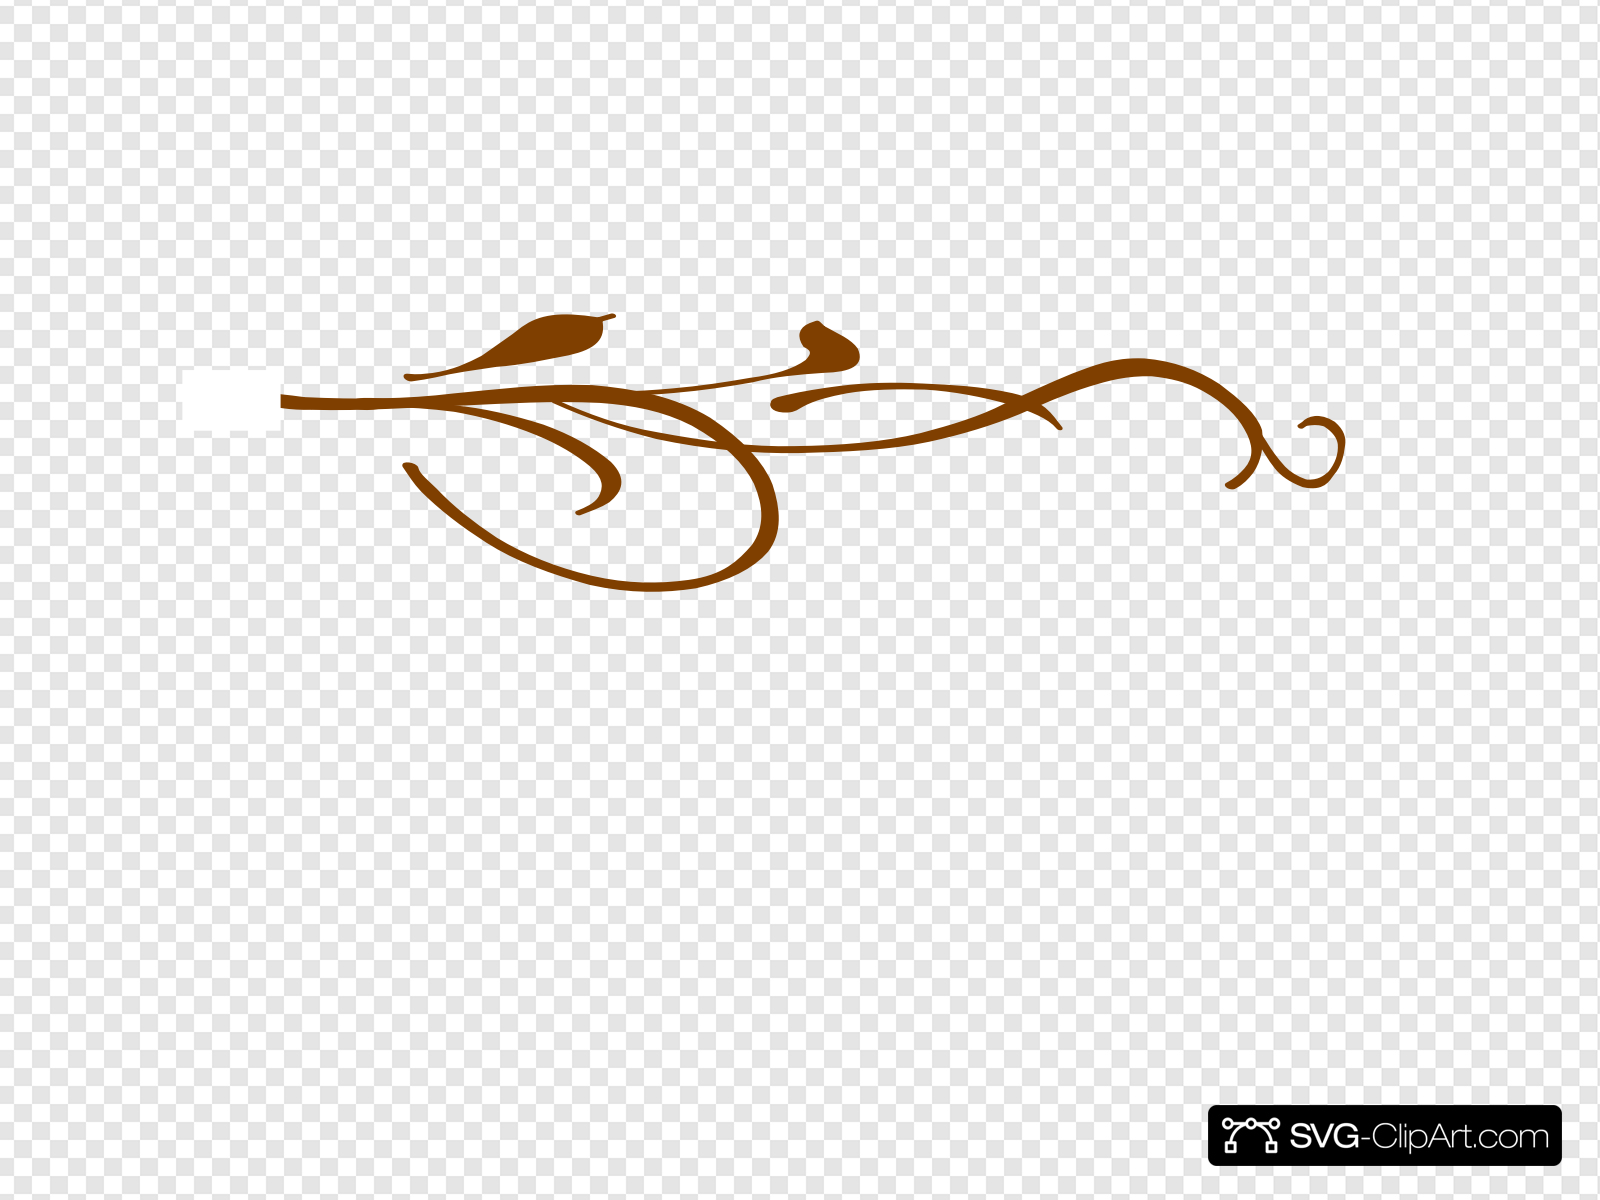 Swirl Brown Top Clip art, Icon and SVG.